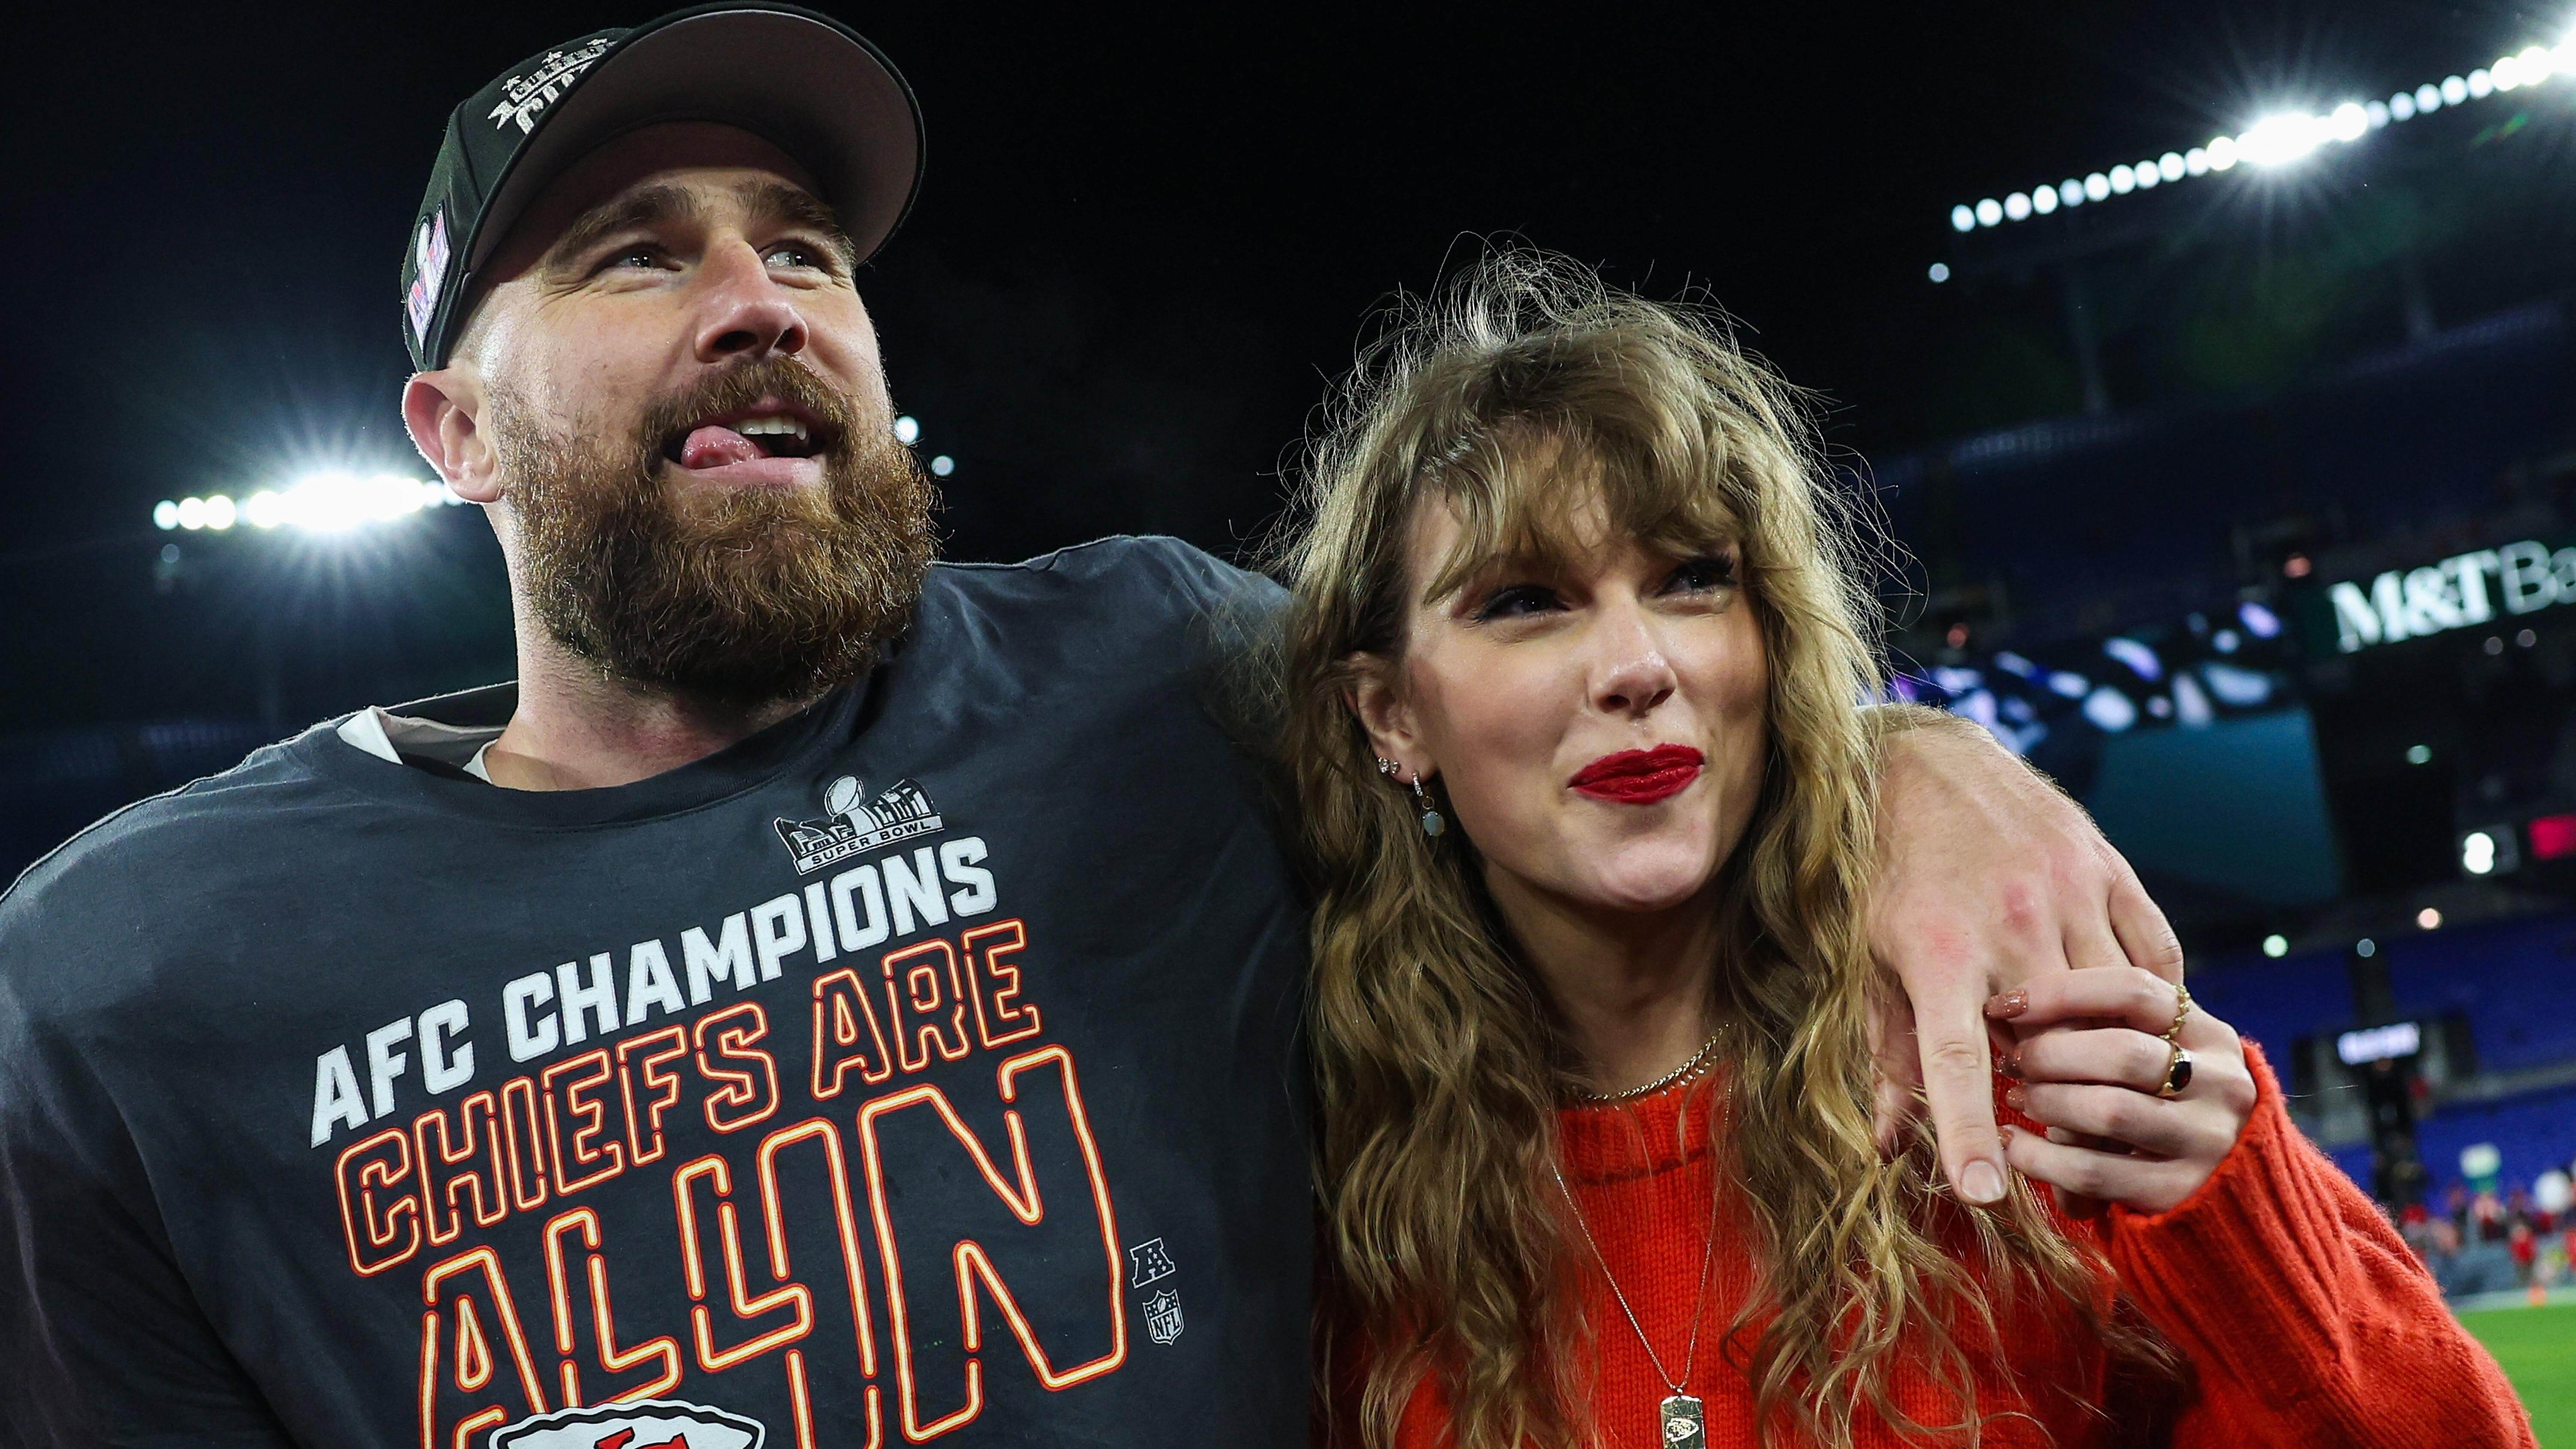 All your questions about Taylor Swift’s boyfriend being in the Super Bowl, answered